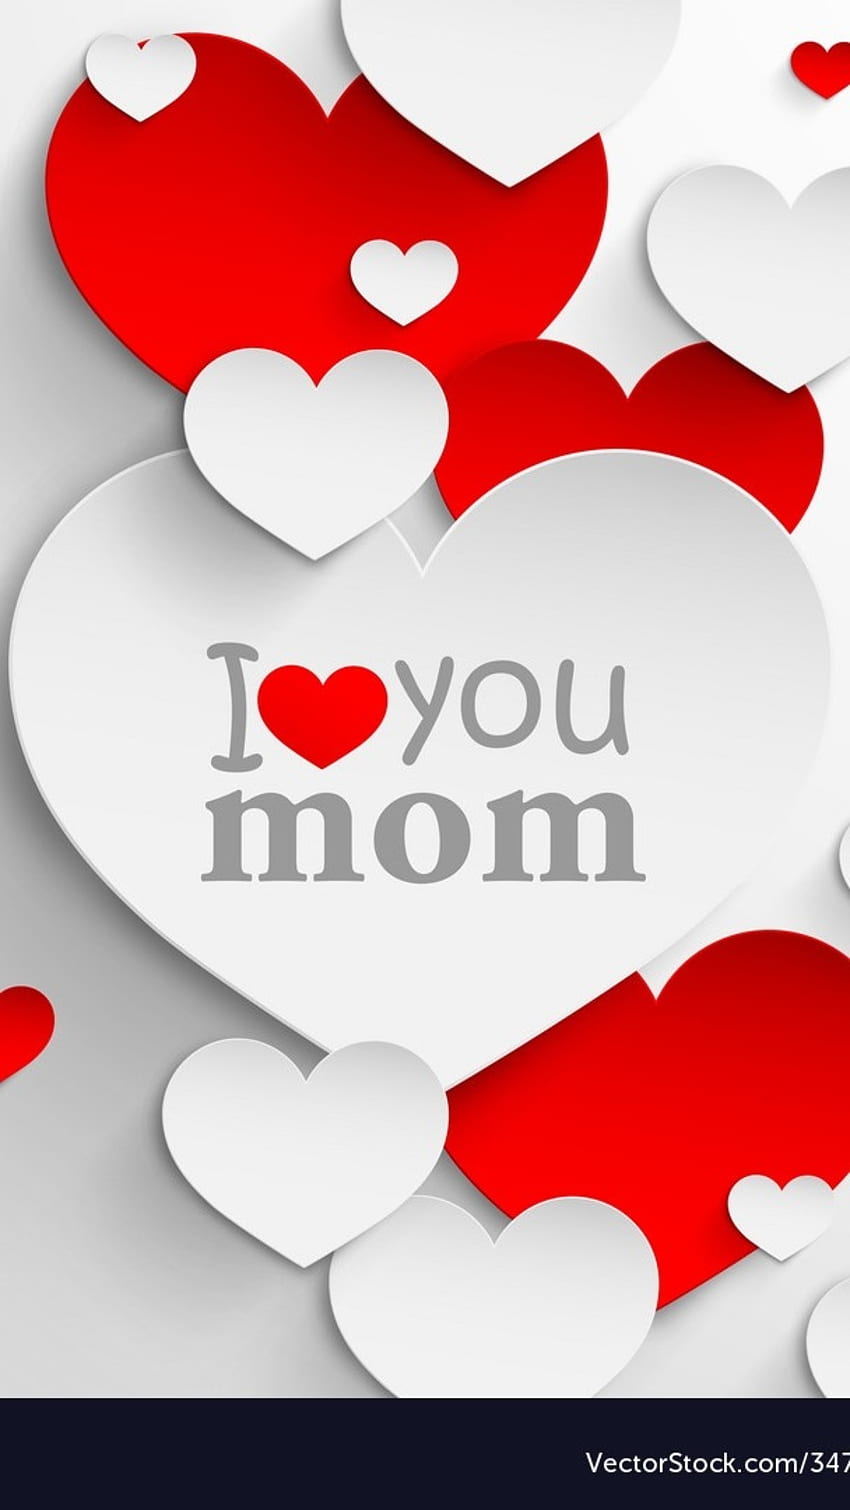 I Love You Mom Phone Wallpapers - Wallpaper Cave-mncb.edu.vn